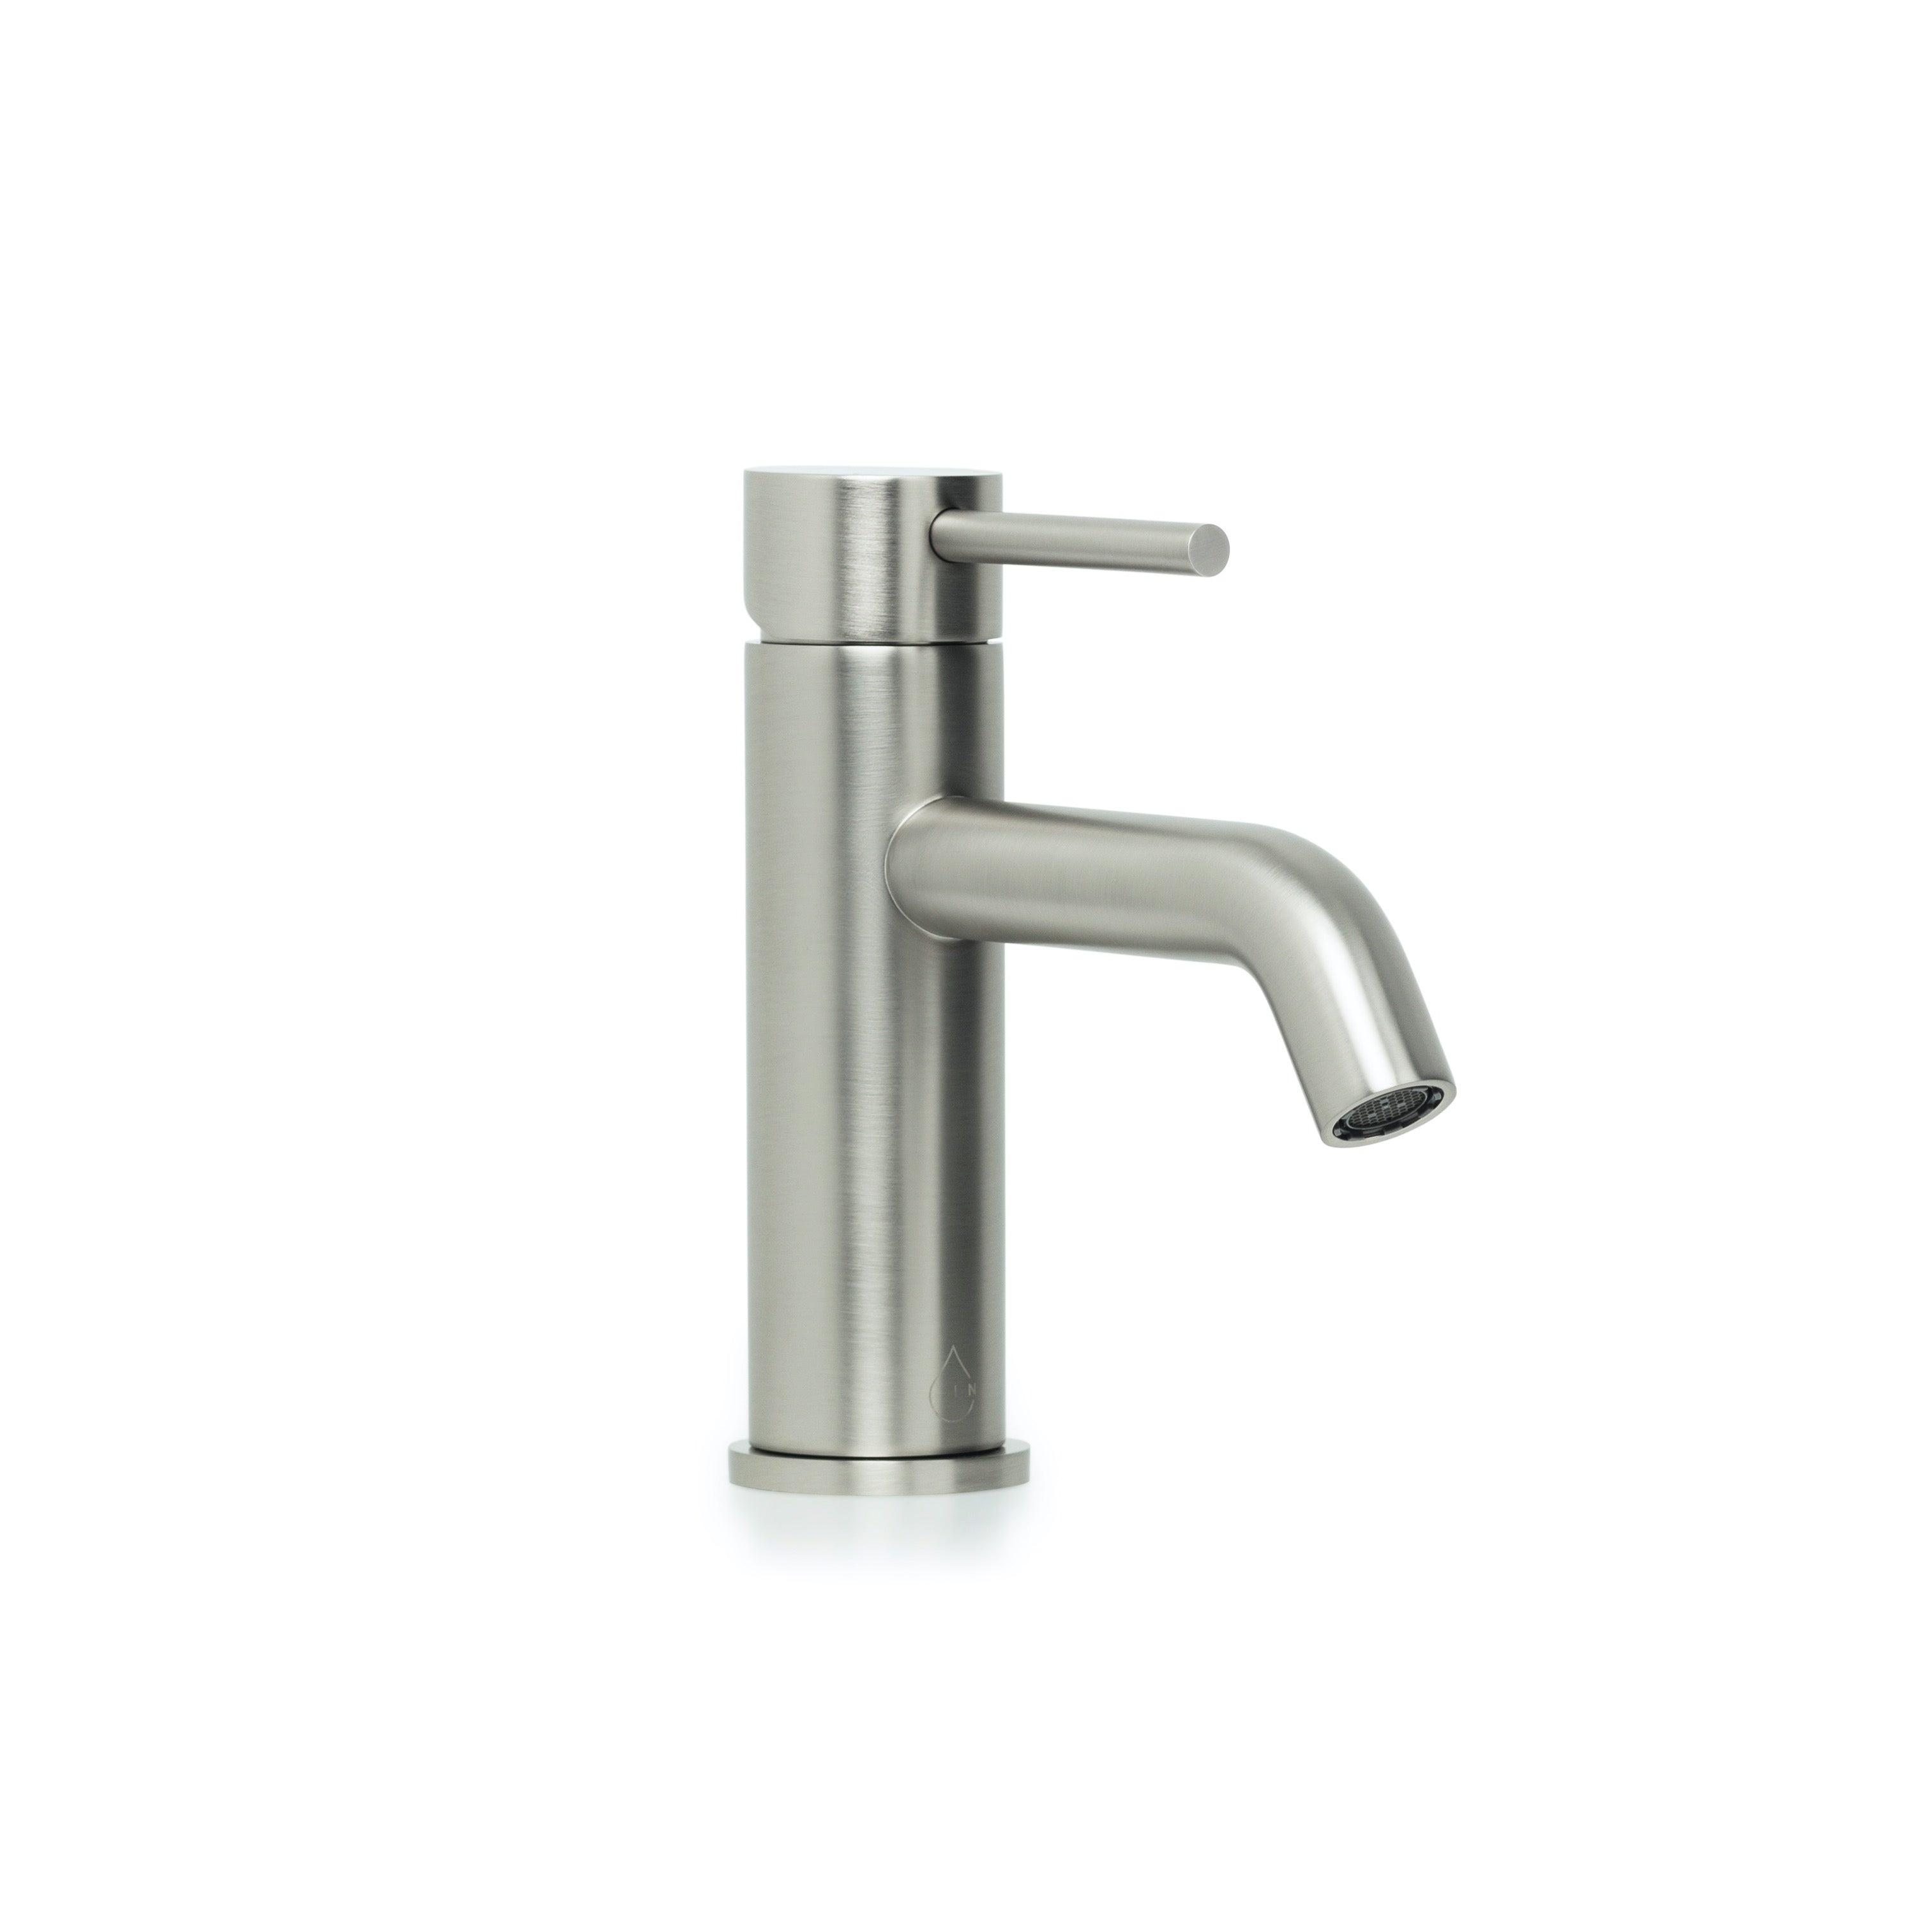 Ex-Display Bondi Pin Lever Basin Mixer with Curved Spout in Brushed Nickel